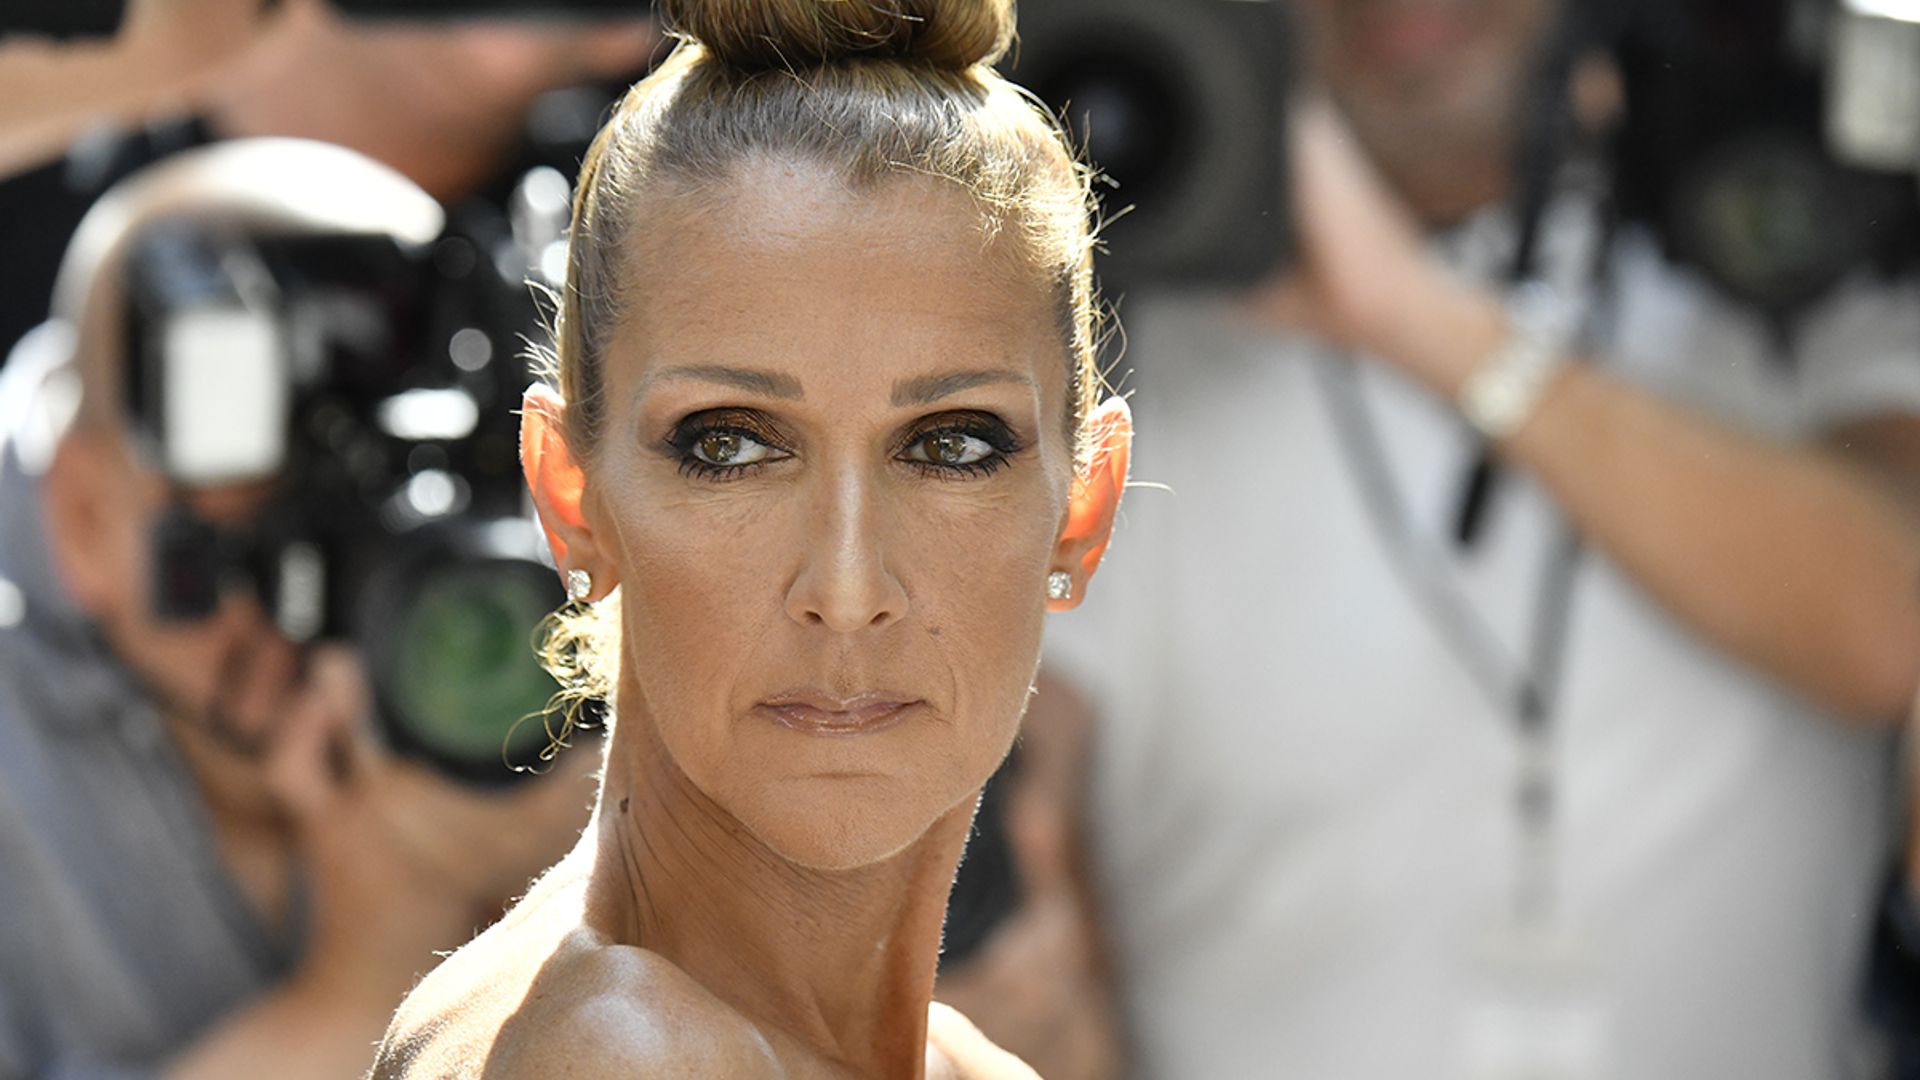 What is wrong with Celine Dion? Her challenging health diagnosis